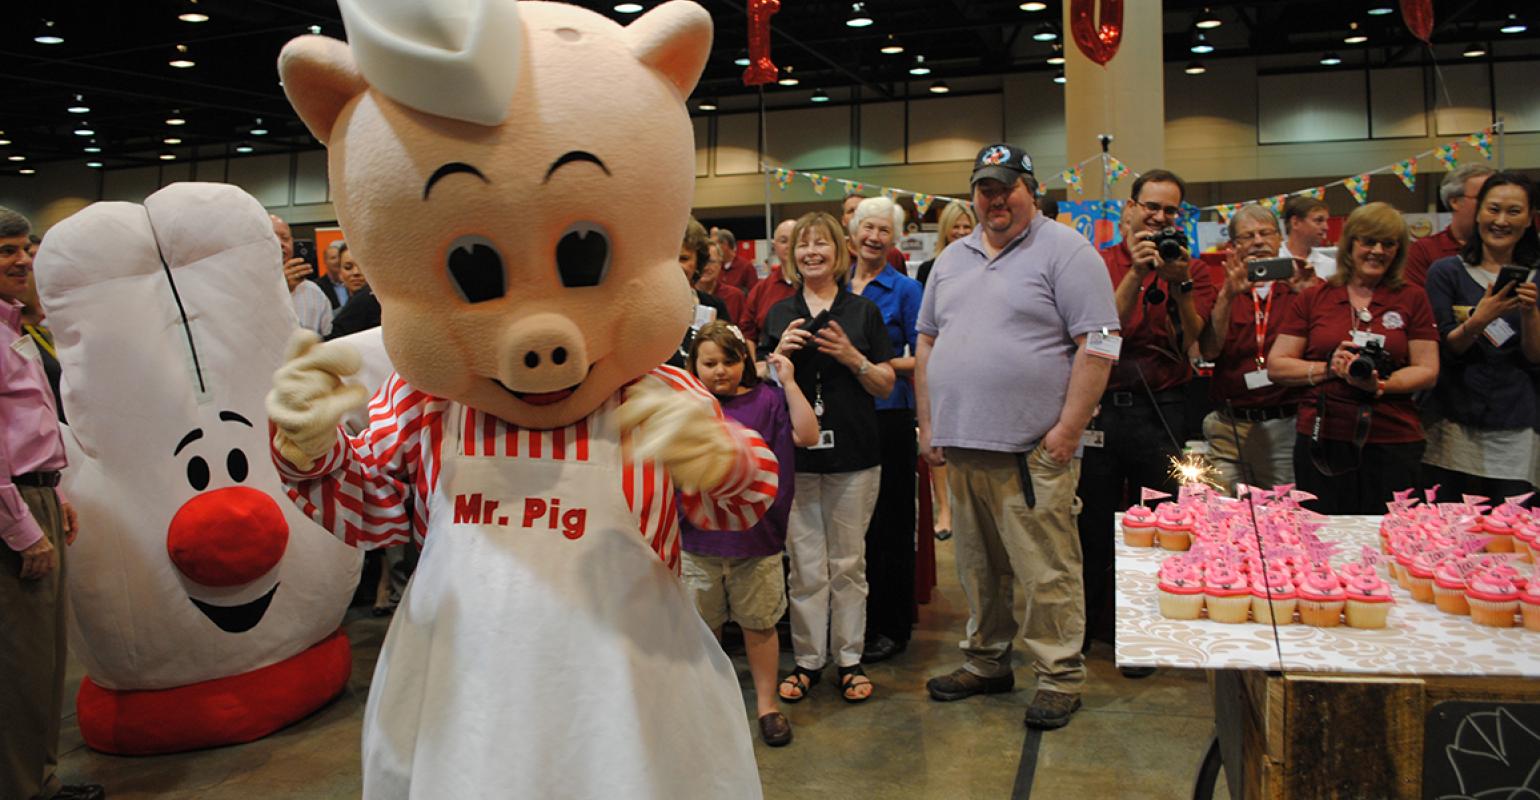 piggly wiggly stuffed pig